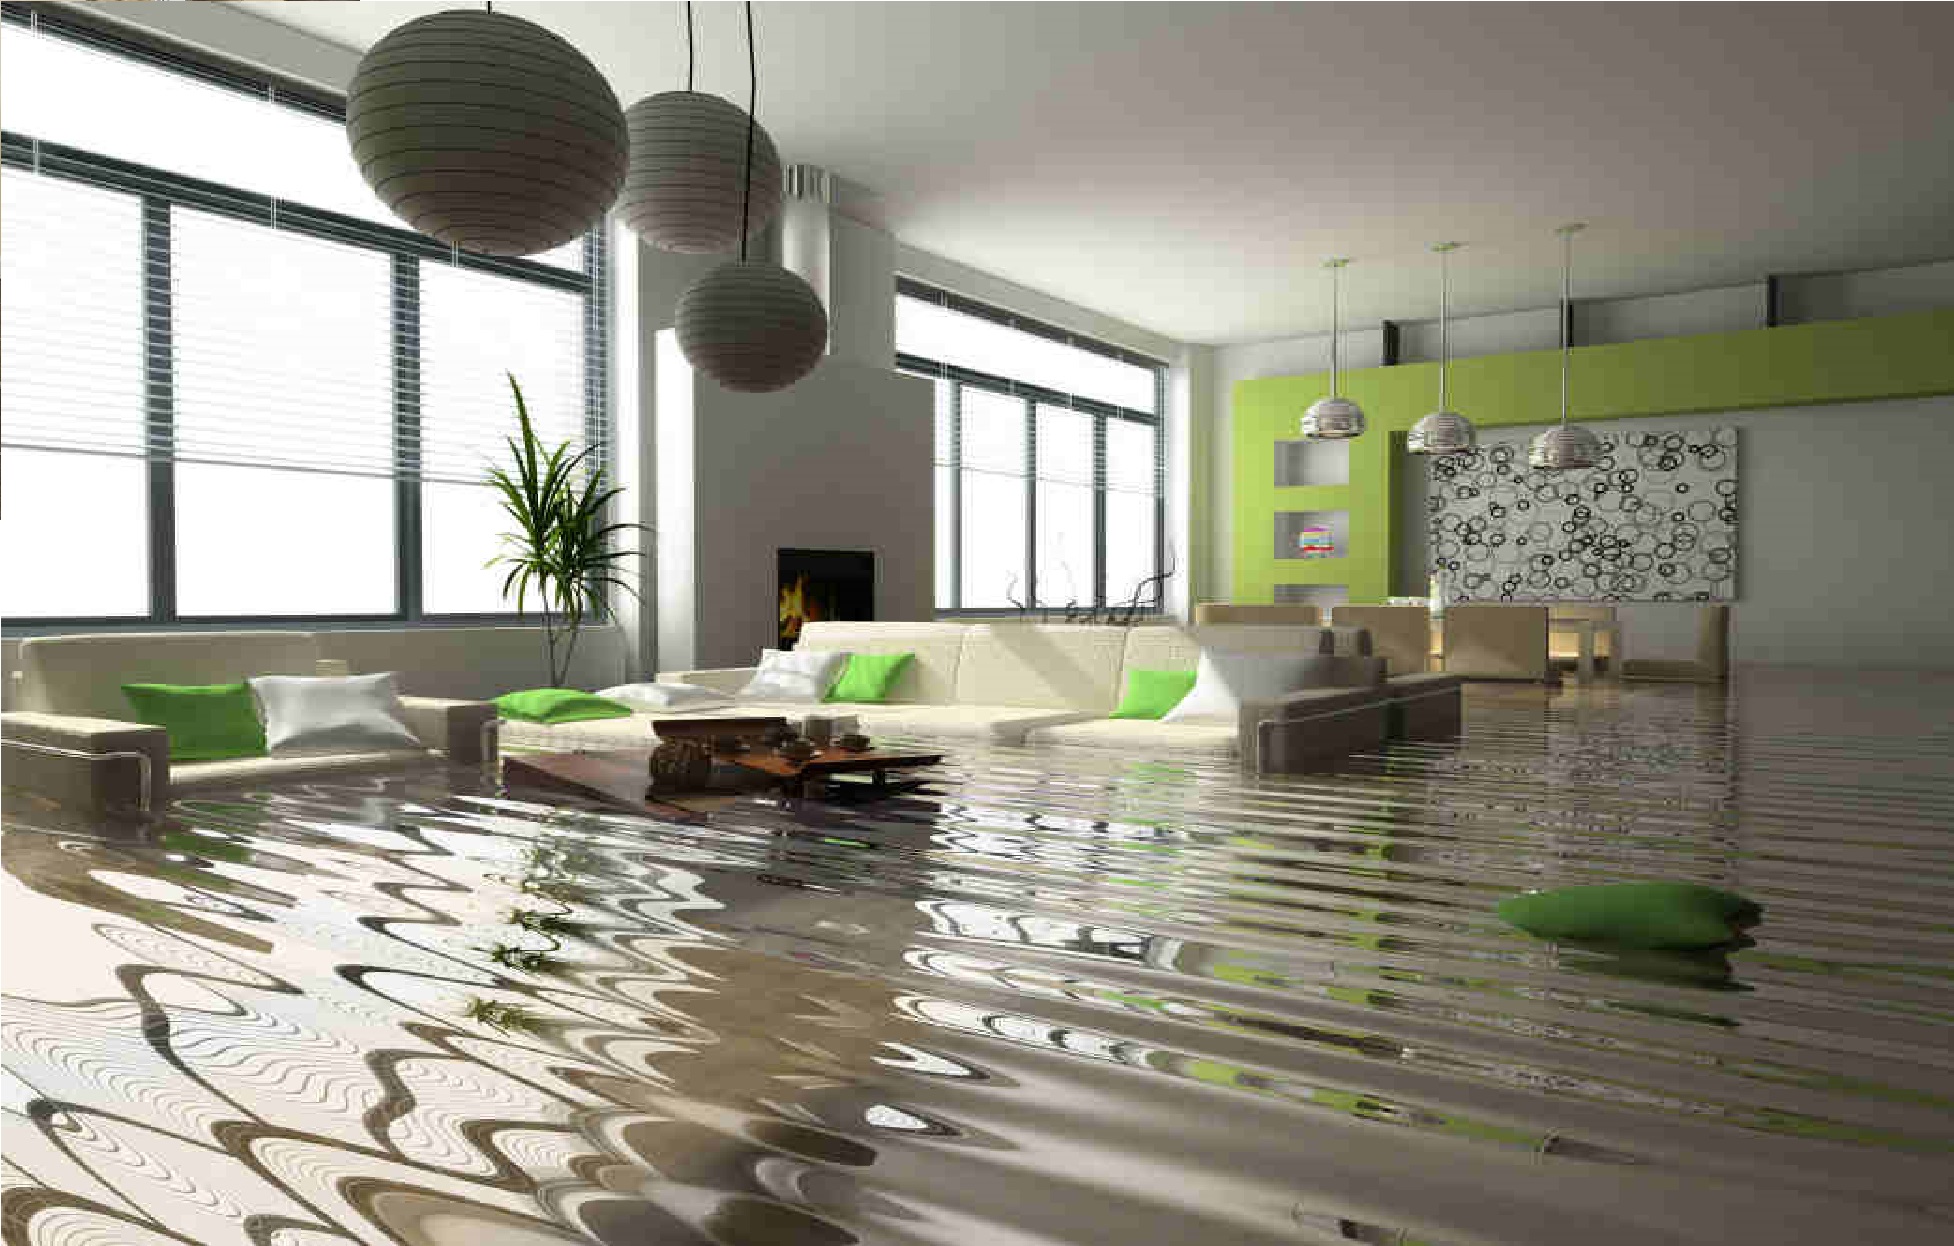 The Exact Category In Which The Water Damage